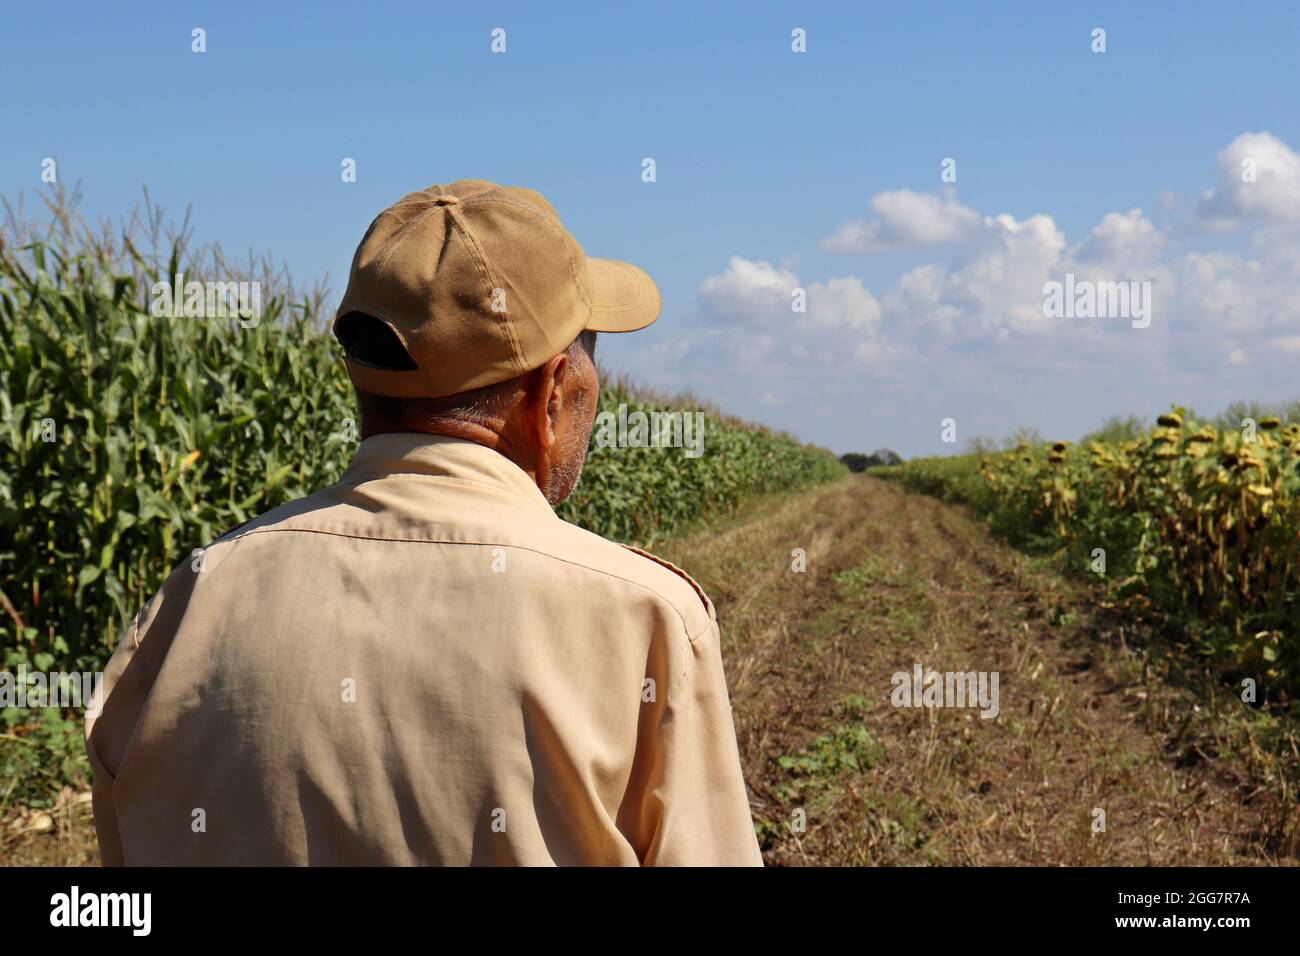 Old farmer stands on a rural road between corn and sunflower field, back view. Elderly man in baseball cap inspects the crop, high corn stalks Stock Photo